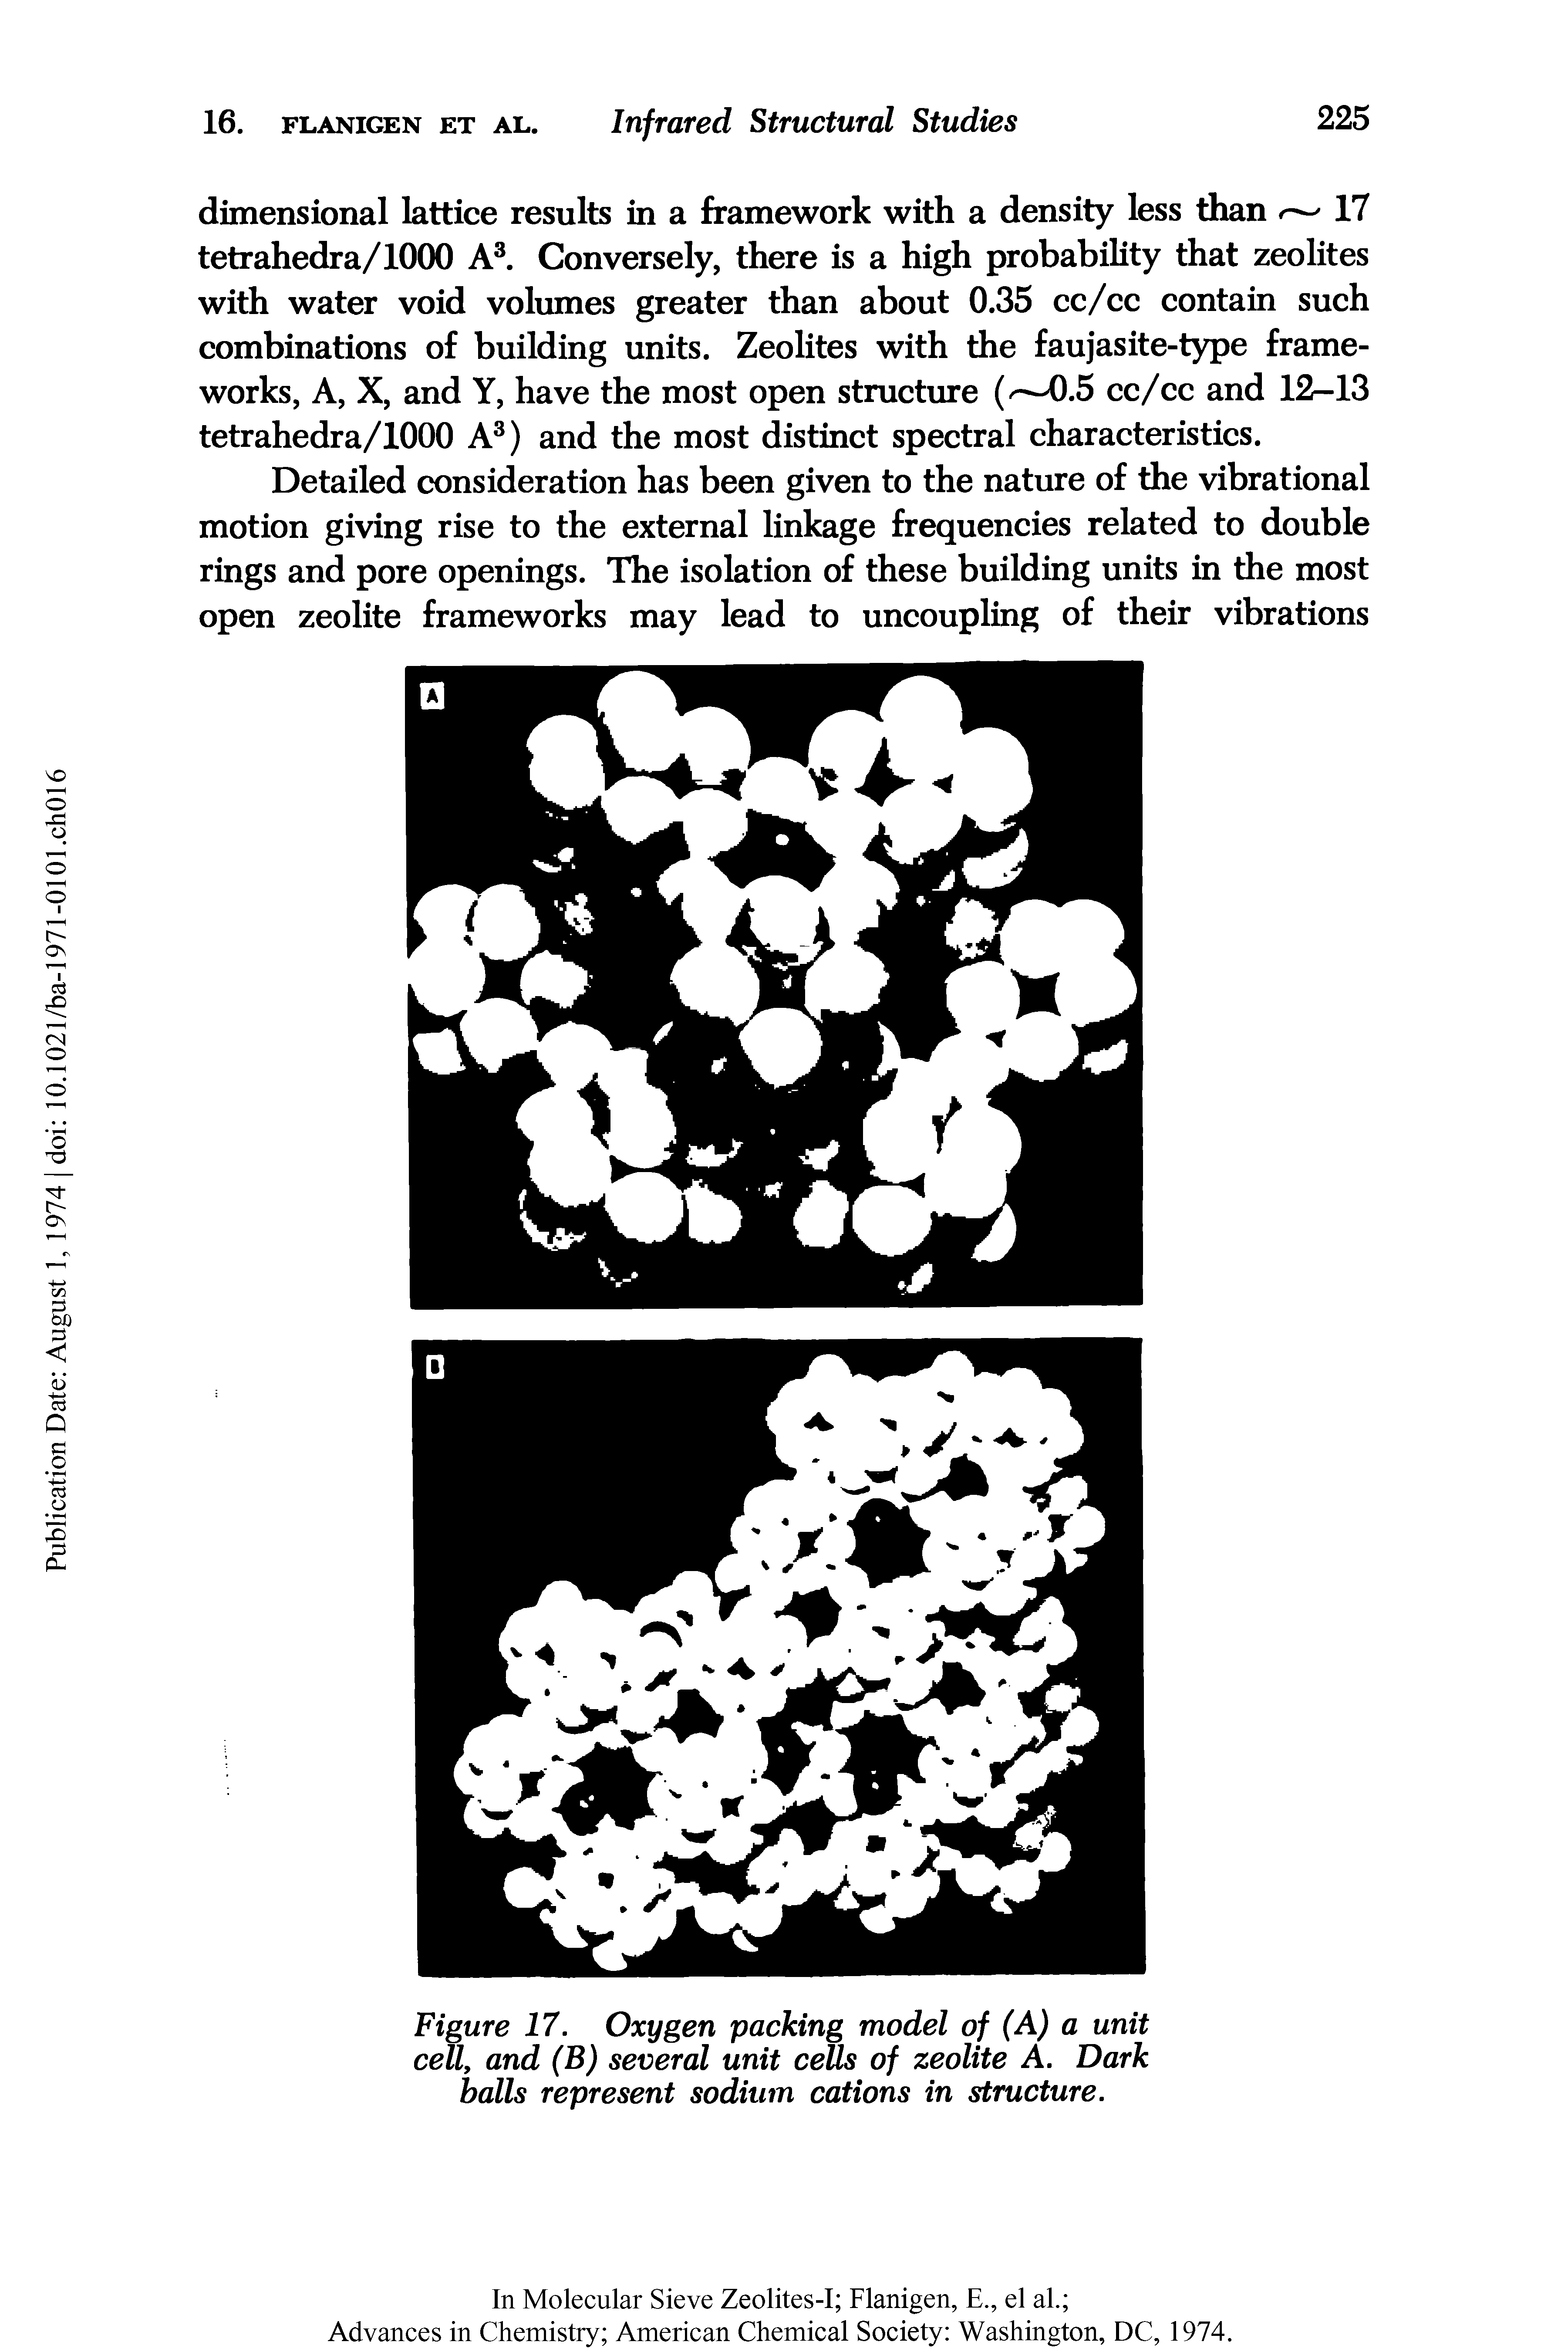 Figure 17. Oxygen packing model of (A) a unit cell, and (B) several unit cells of zeolite A. Dark balls represent sodium cations in structure.